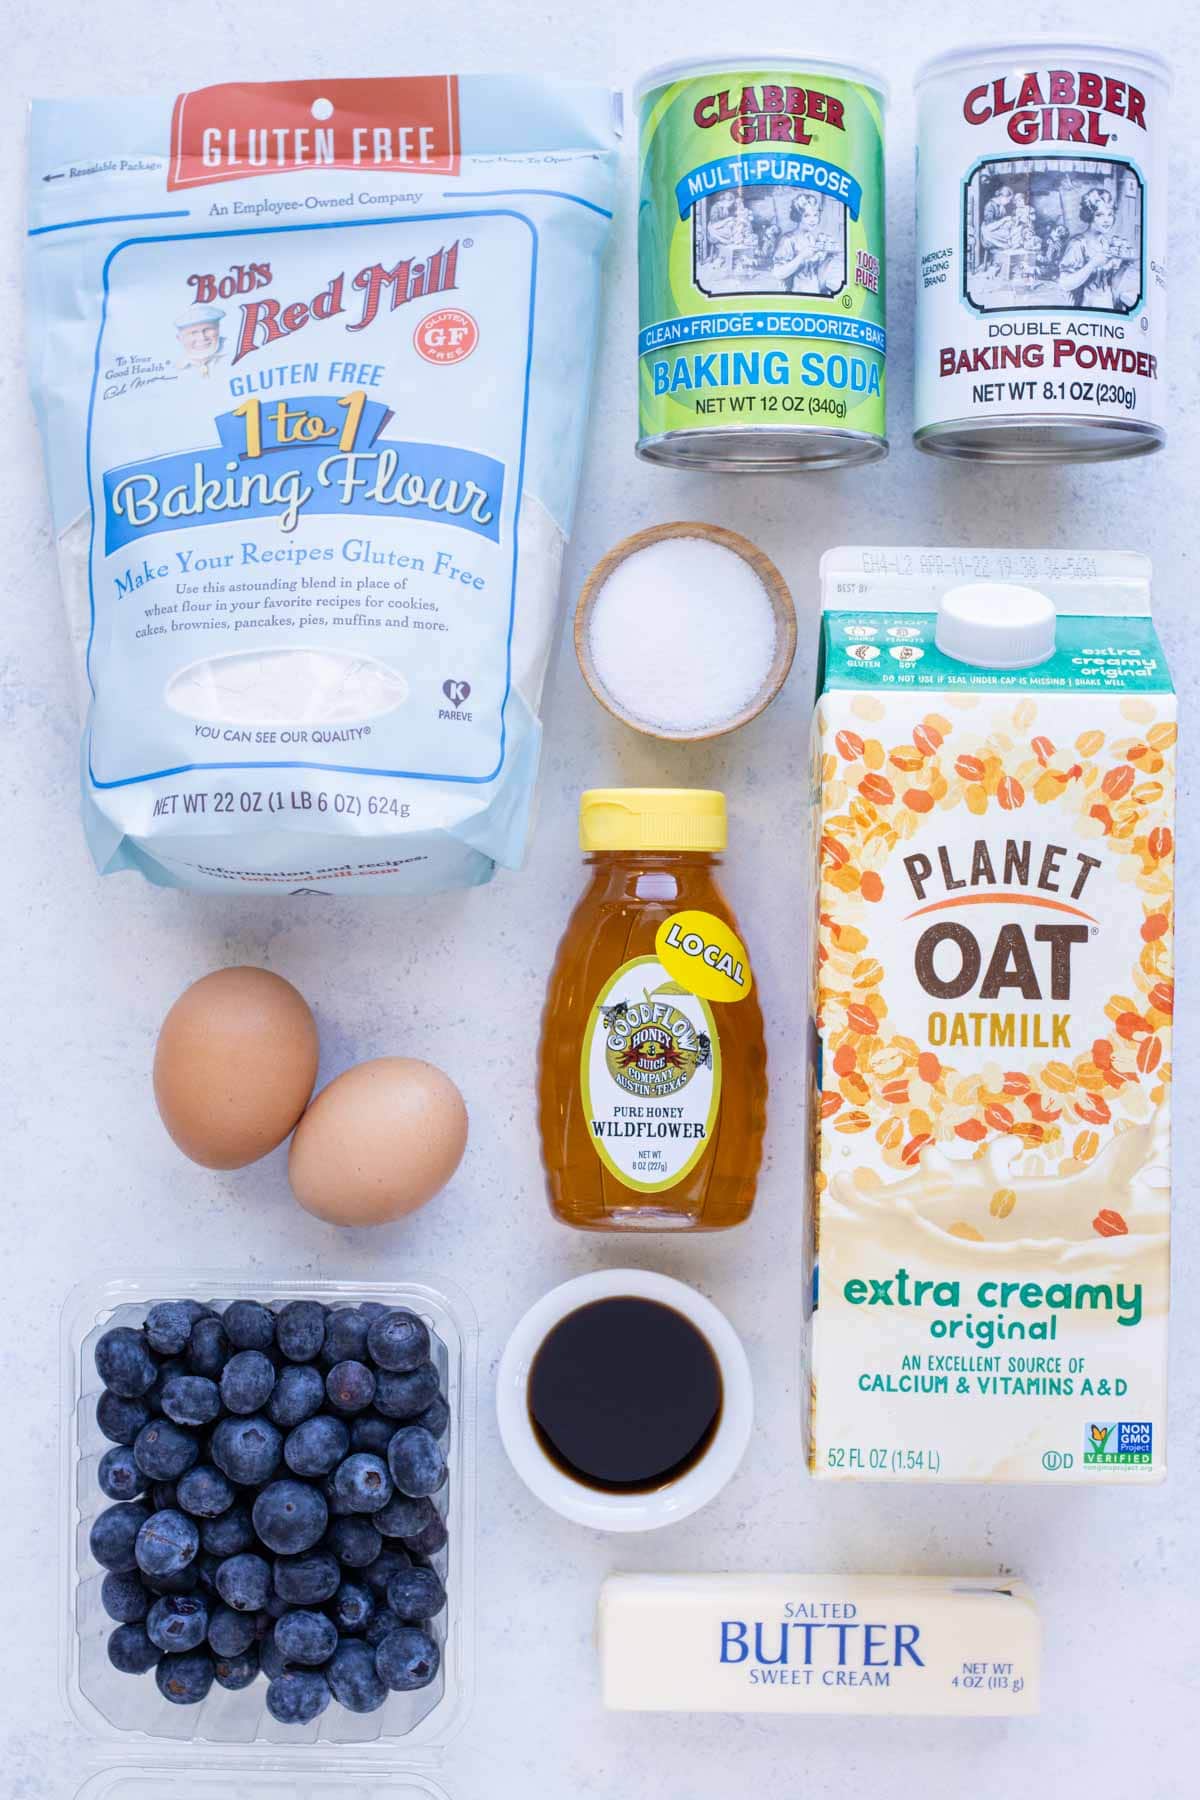 Flour, milk, eggs, honey, blueberries, vanilla, baking powder, and baking soda are the ingredients for this recipe.